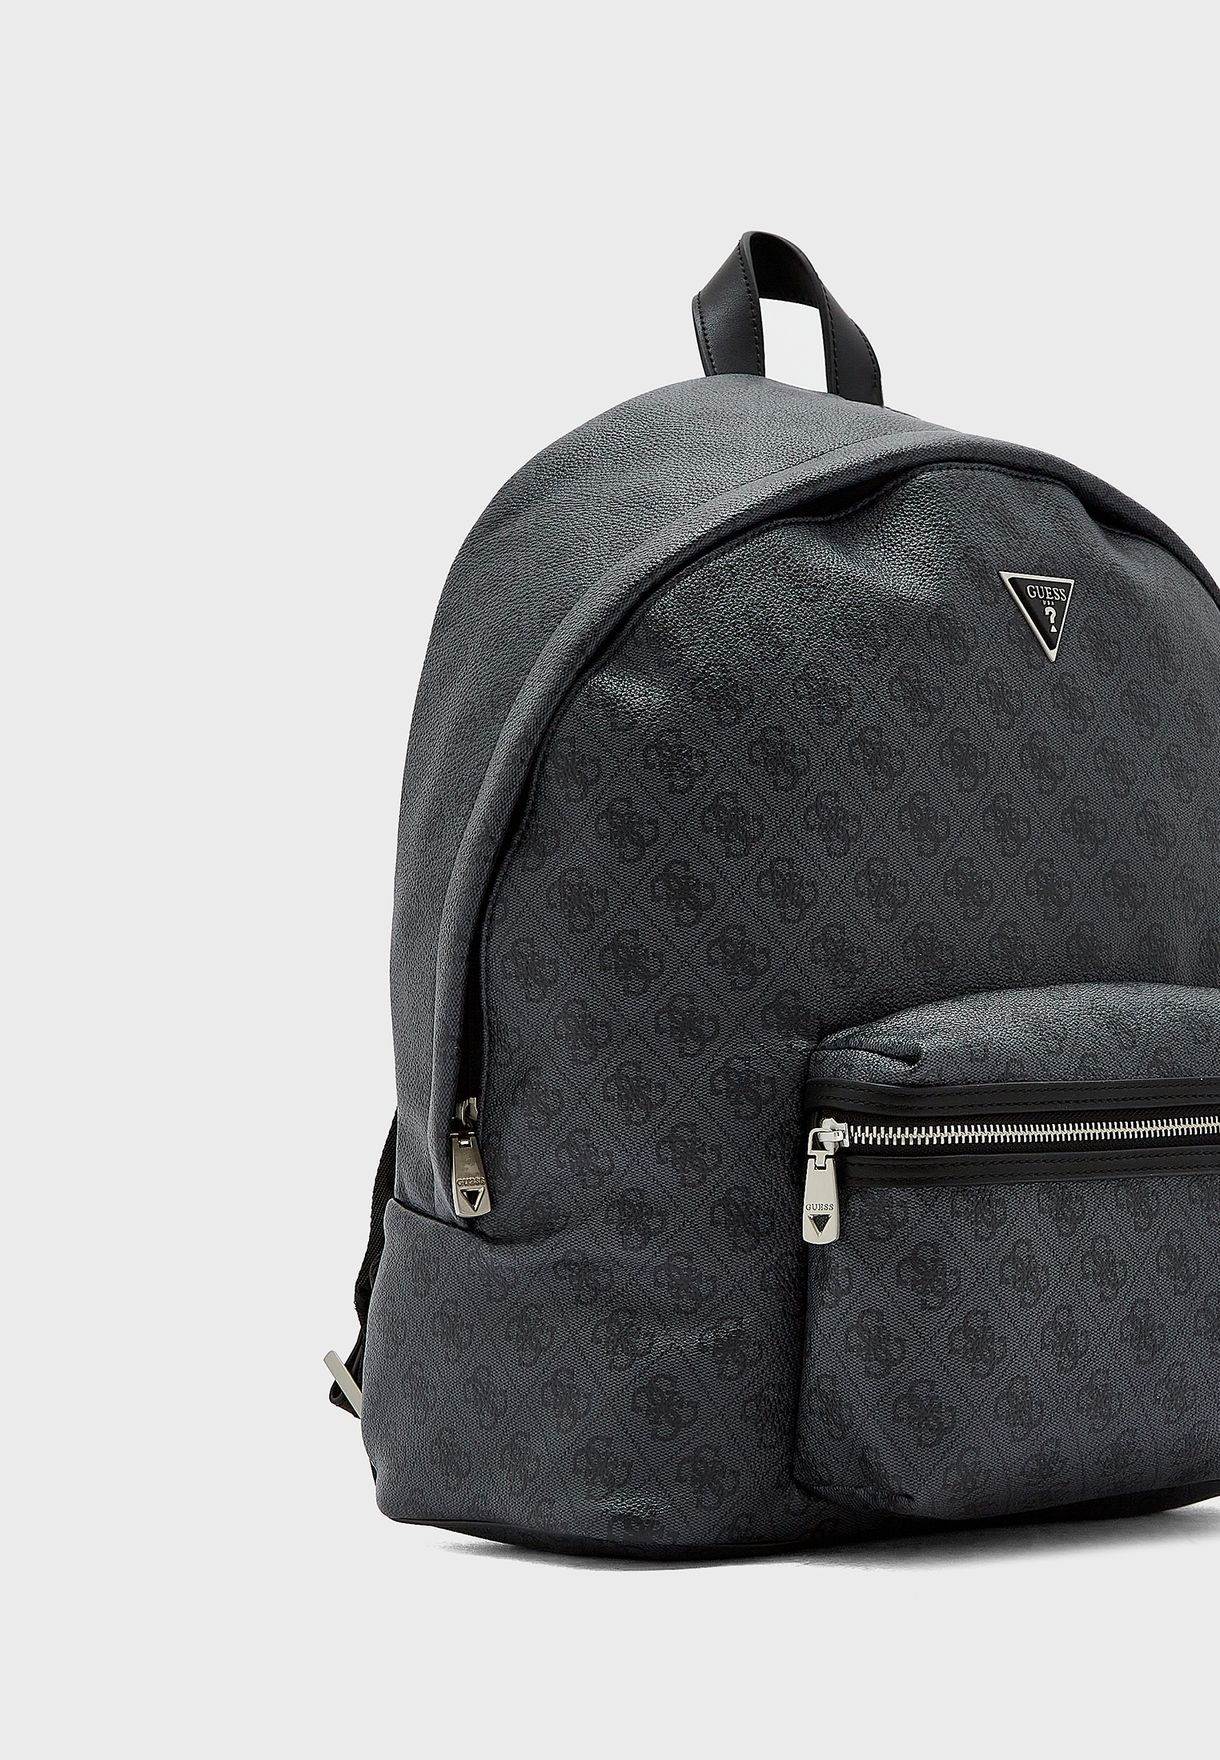 Vezzola Smart Compact Backpack